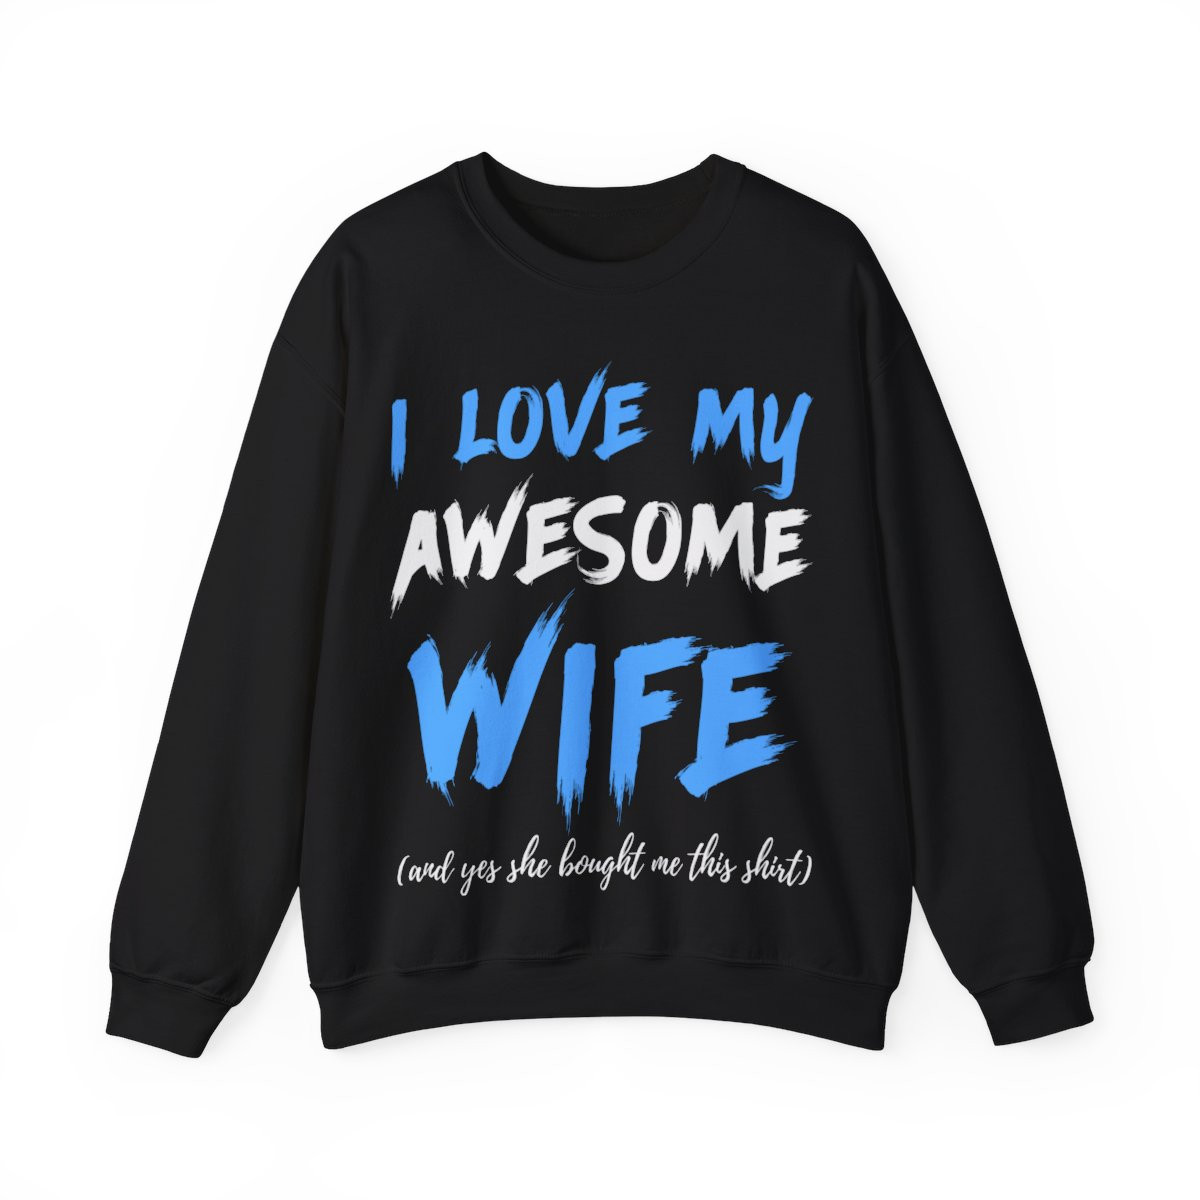 I Love My Awesome Wife and Yes She Bought me This Sweat Shirt